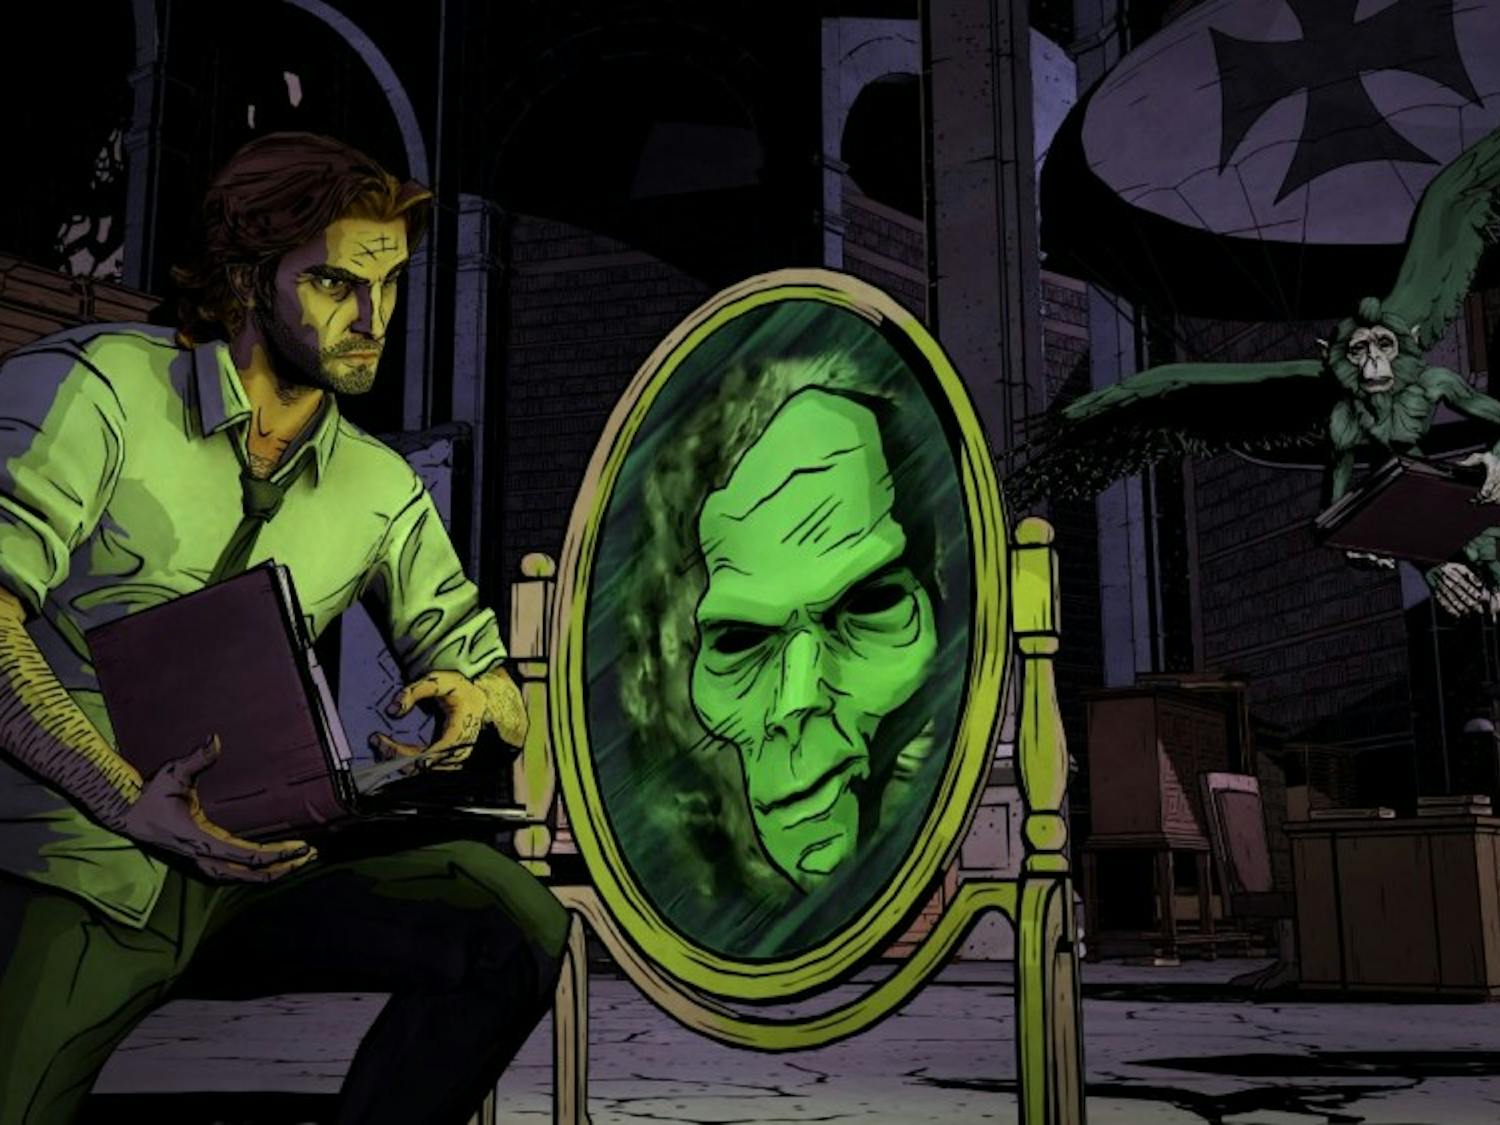 “The Wolf Among Us” takes graphical cues from the hit television series, “The Walking Dead.” (Photo courtesy of Telltale Games)